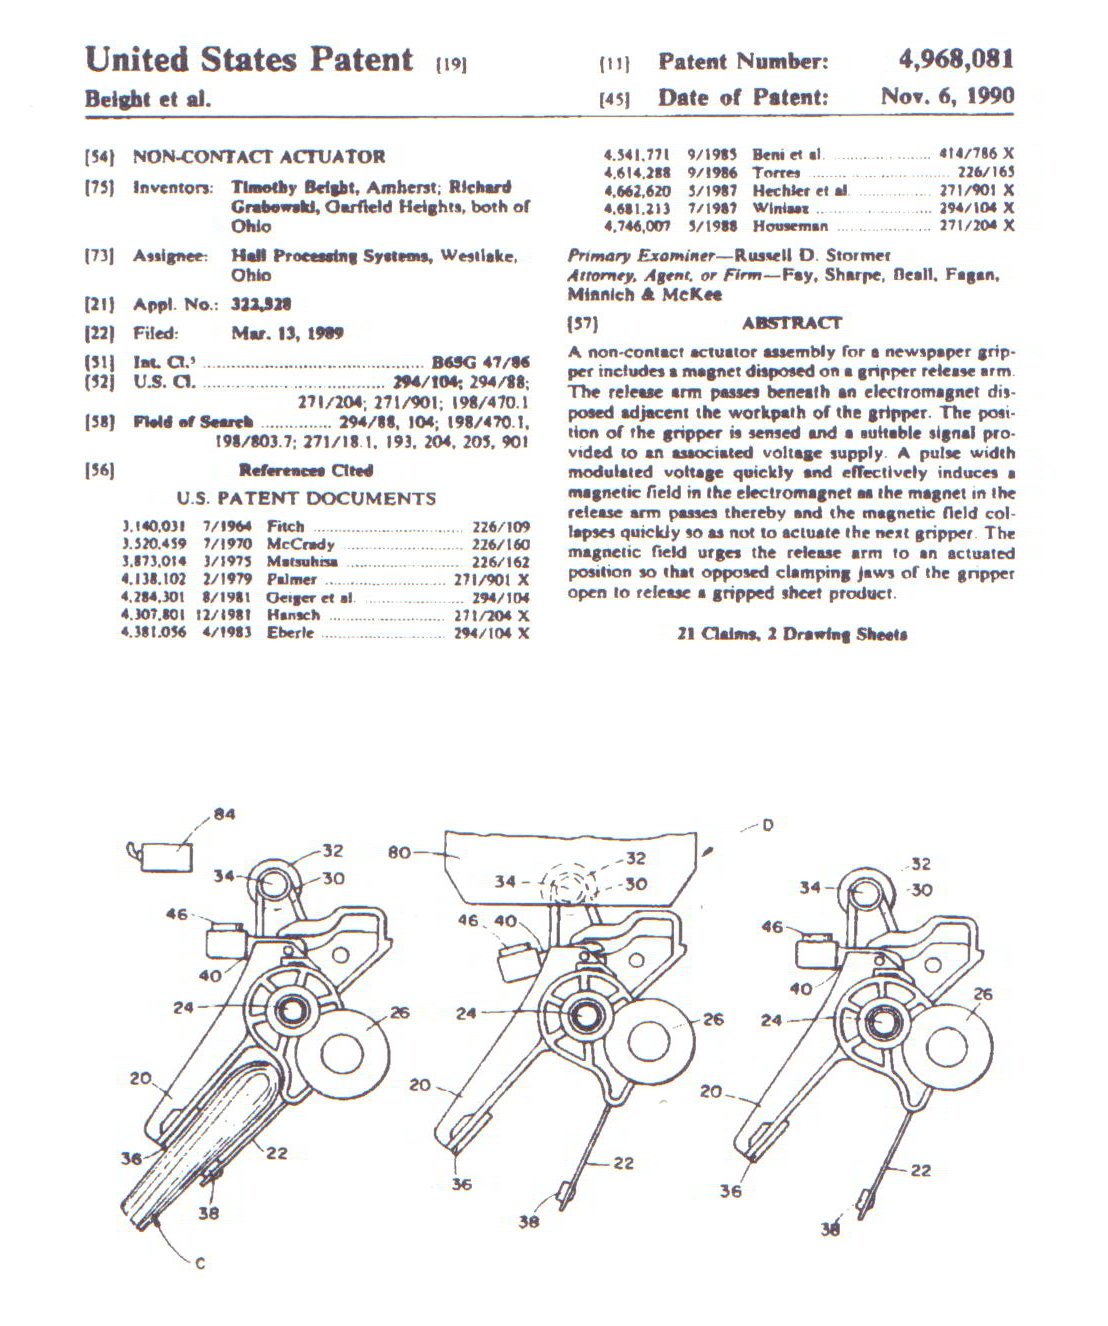 New Product Development - Quick Release Non Contact Mechanism patent - gripper project